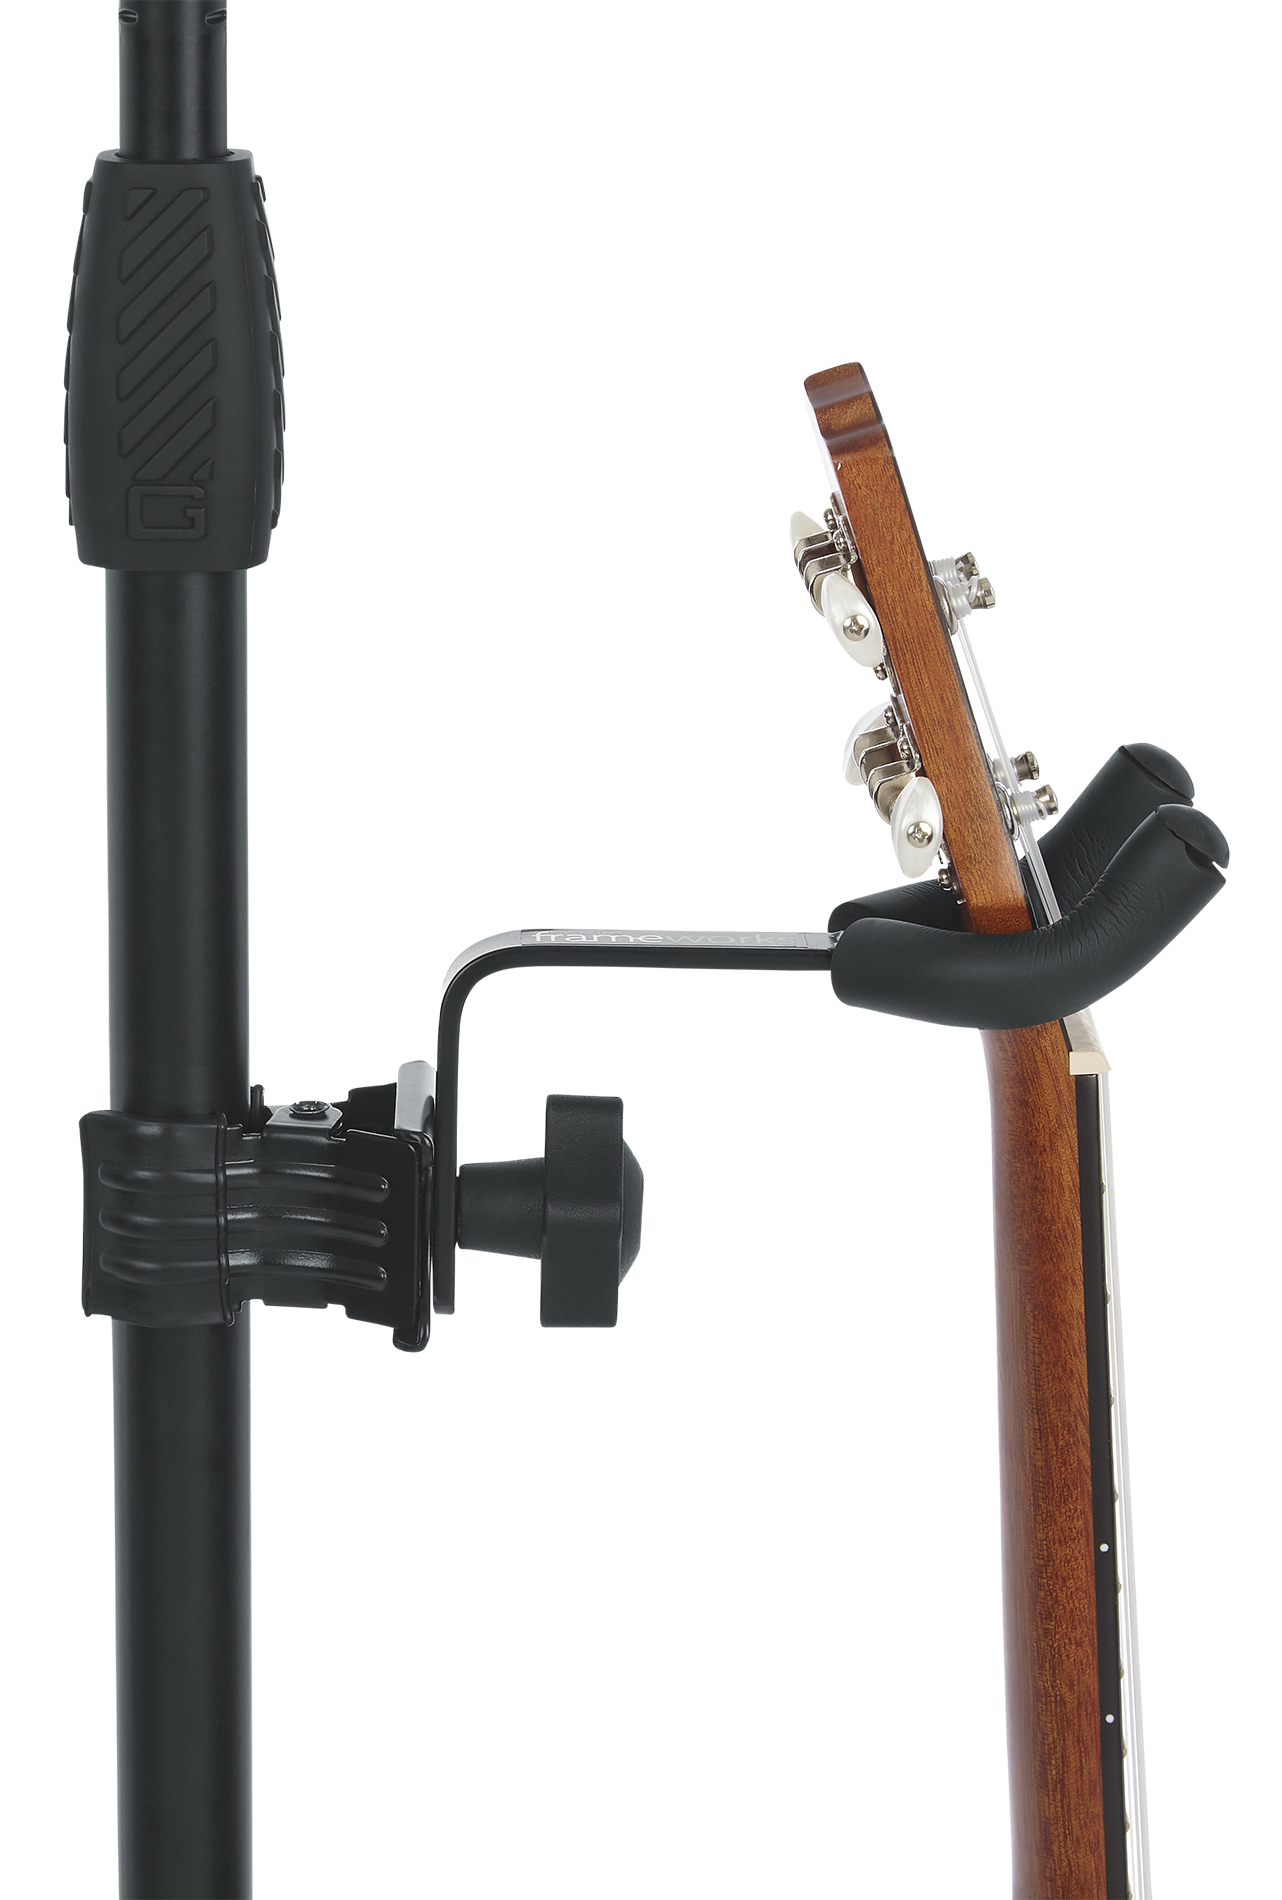 Uke/Mando Hanger Attachment w/ Clamp for Mic Stand-GFW-MICUKE-HNGR